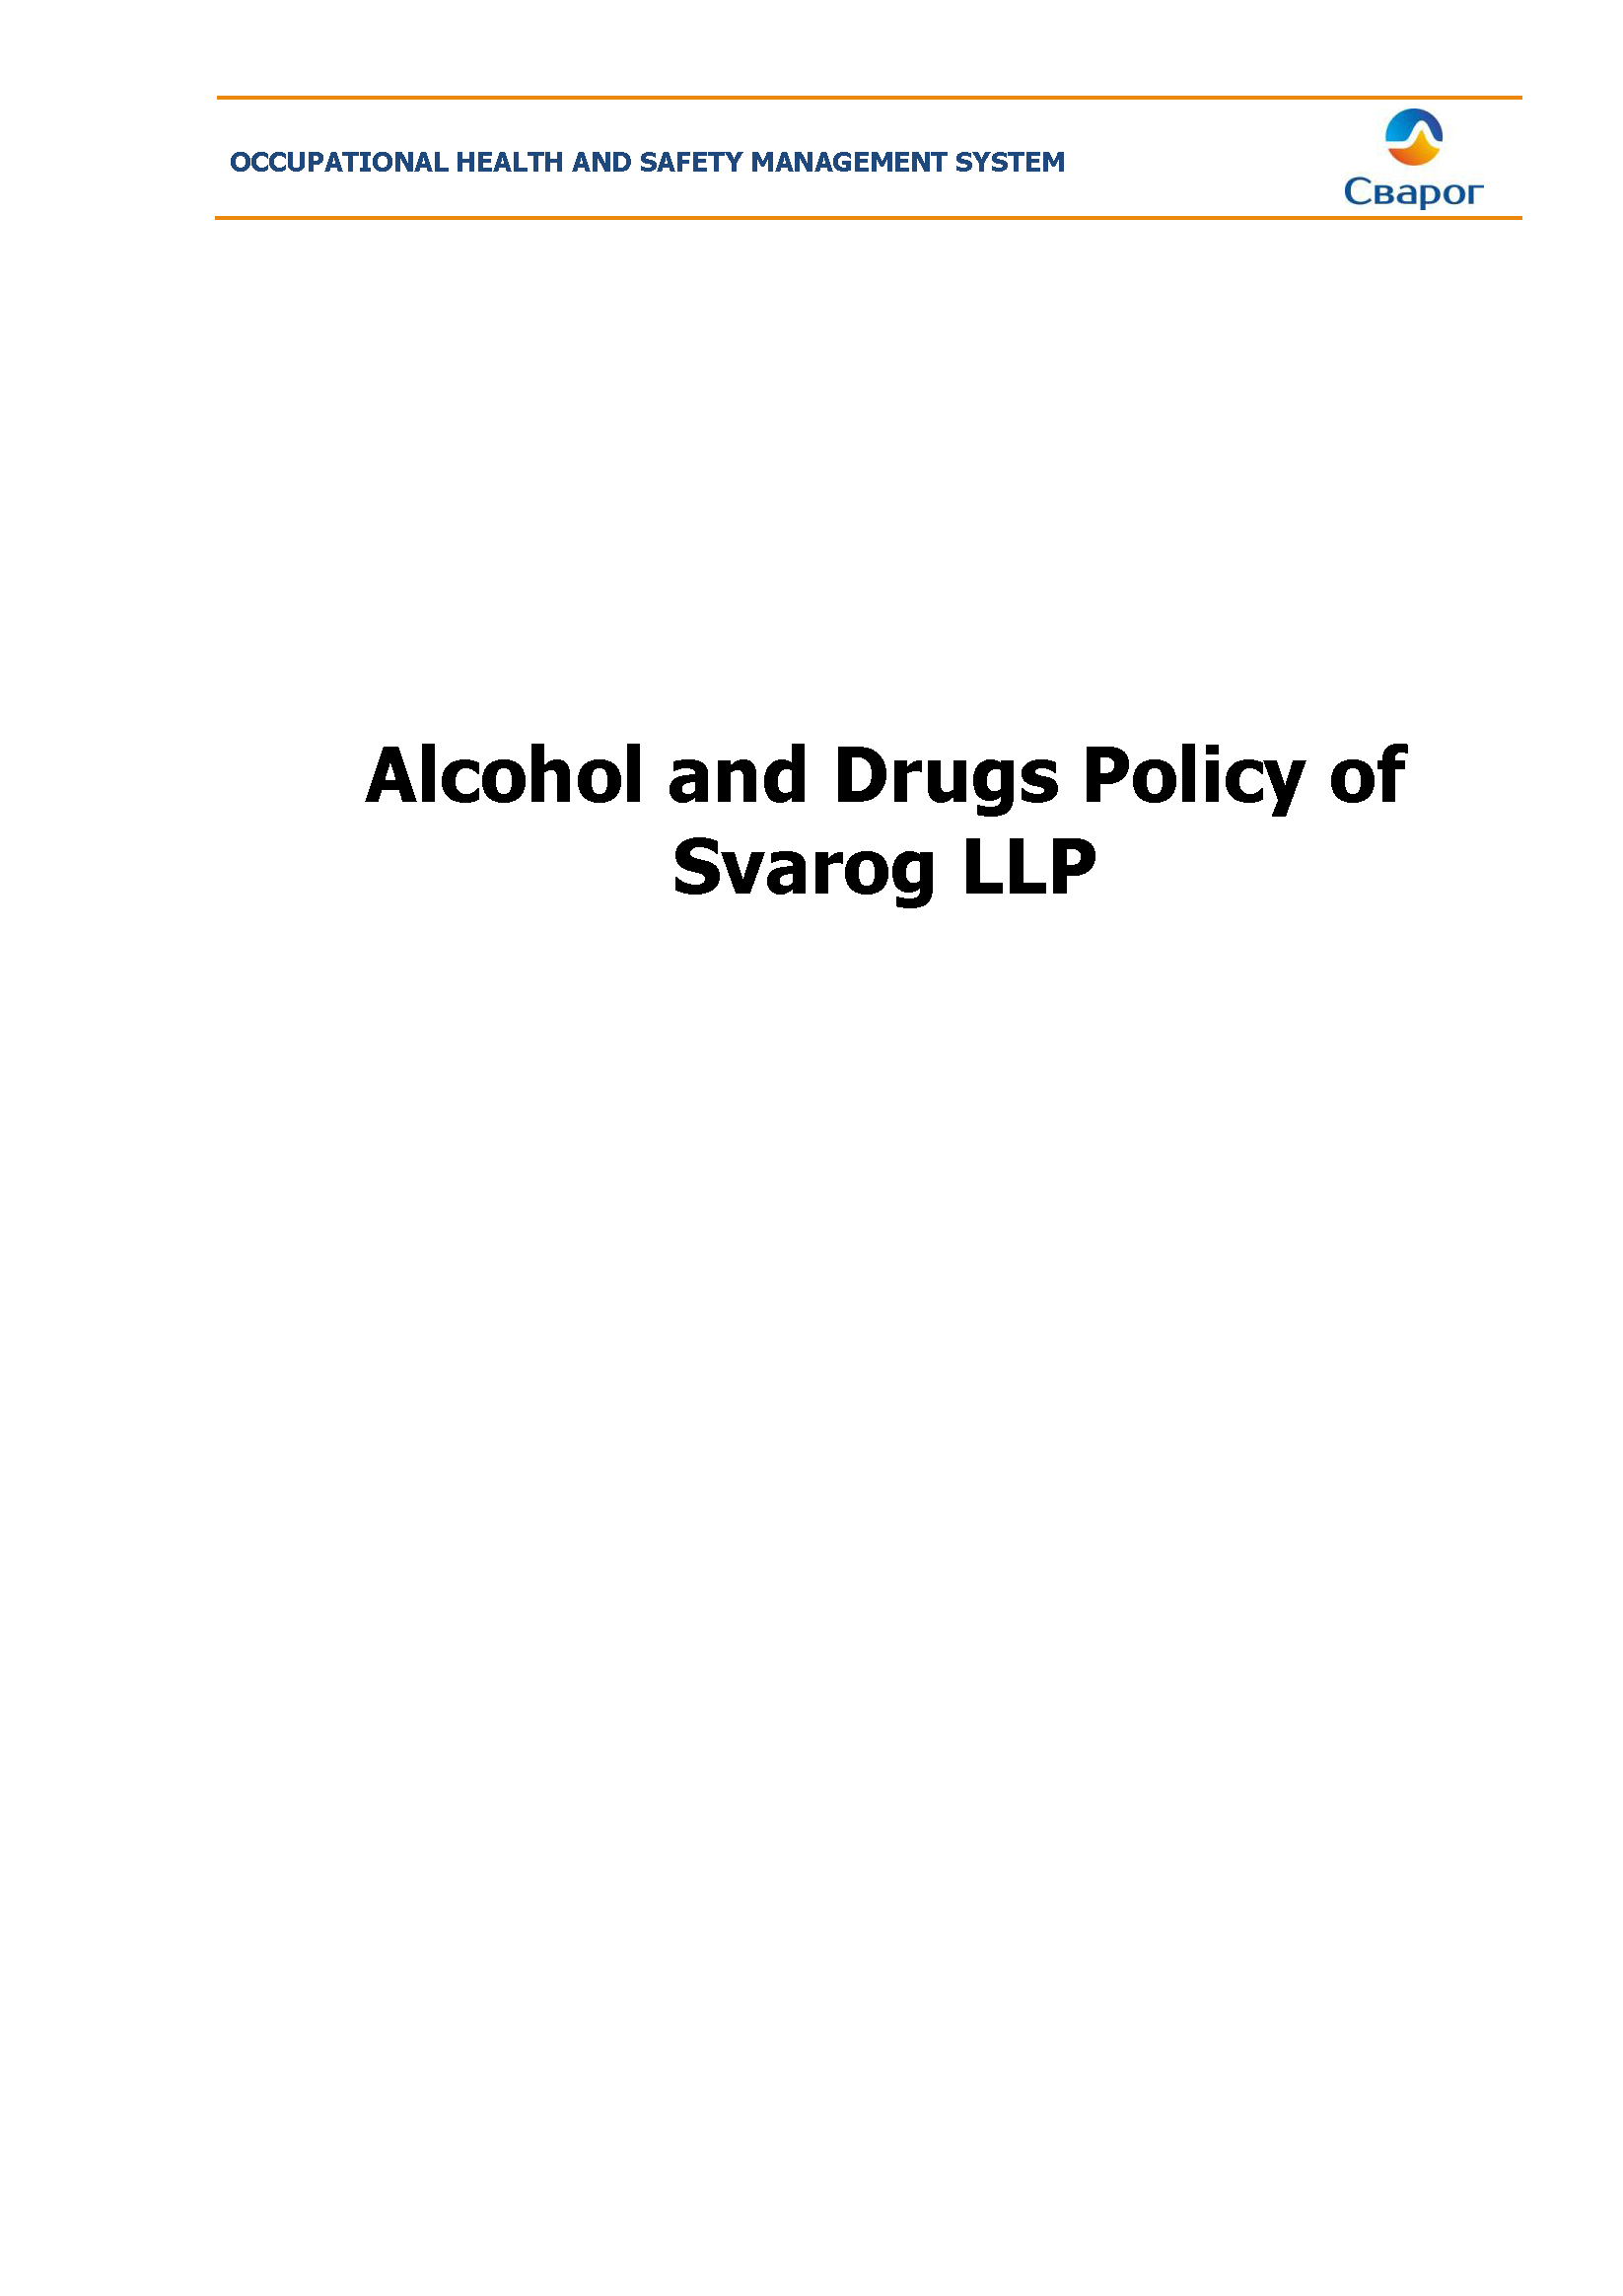 Alcohol and Drugs Policy of Svarog LLP